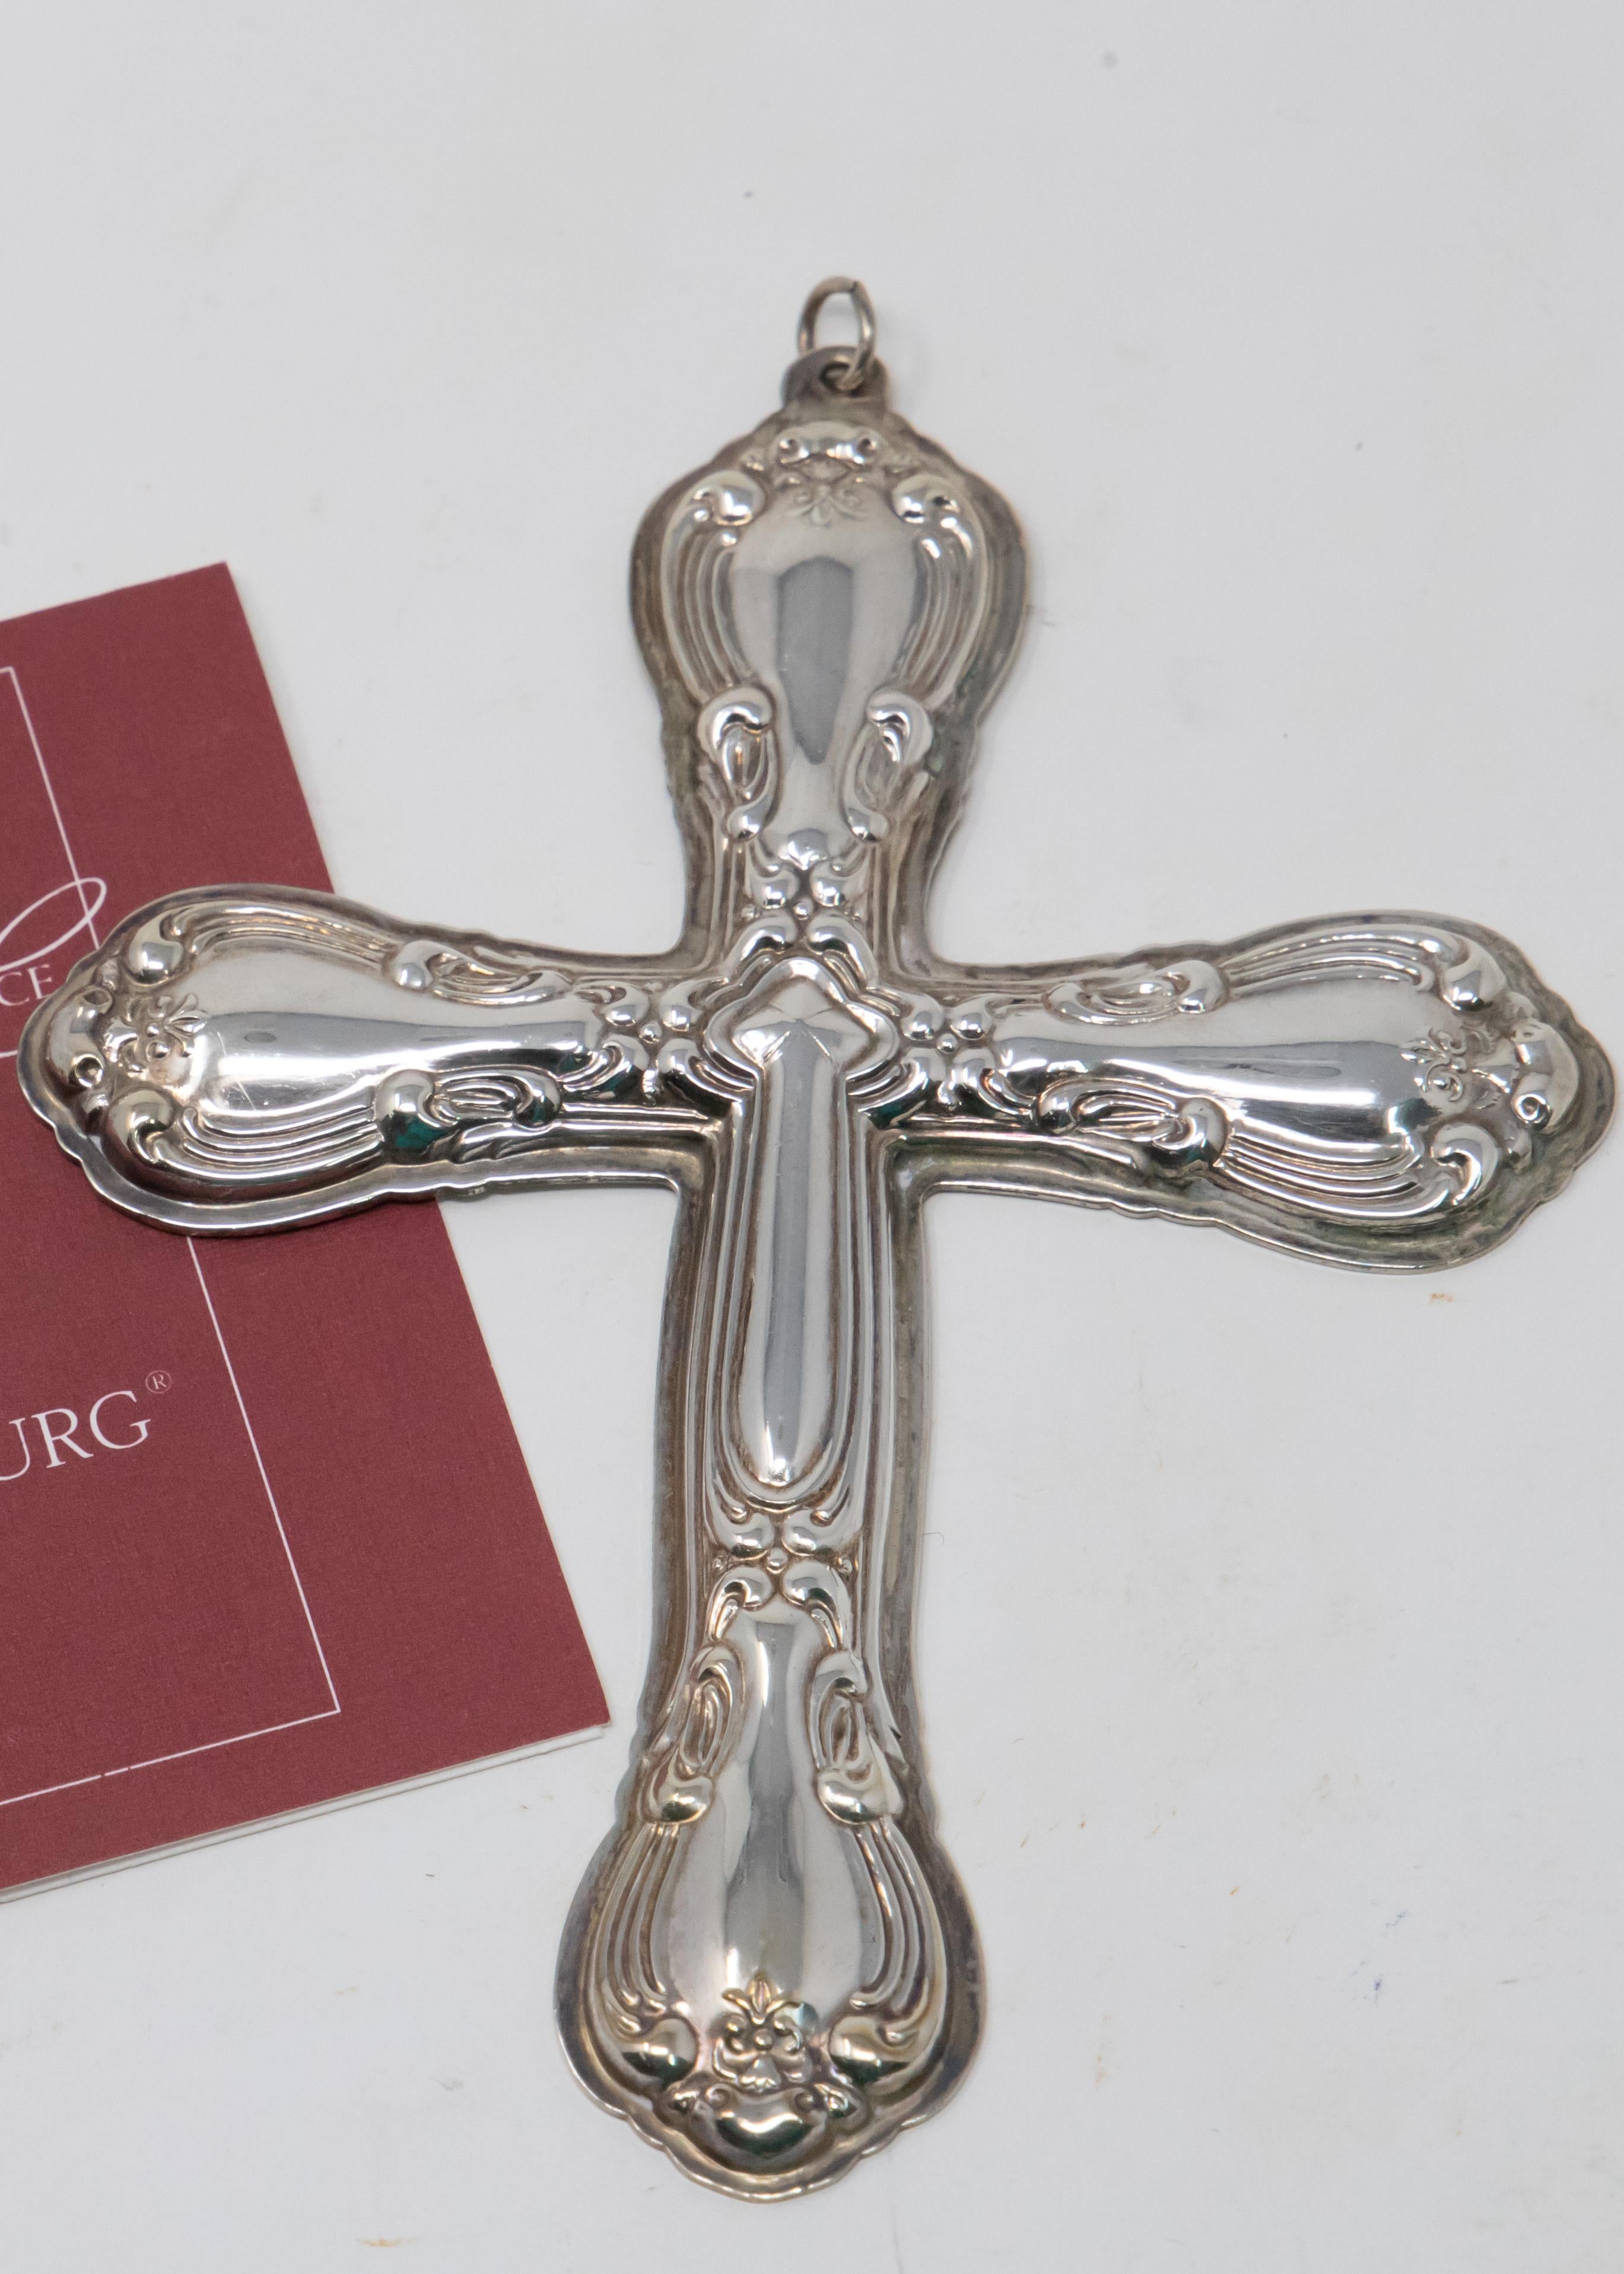 Offering this stunning Gotham Strasbourg Cross ornament from 1998. Having geometric foliate detail all around the outside edge of the piece. The back is matte finished and inscribed with Gorham Sterling, trademarks, Christmas, 1998.